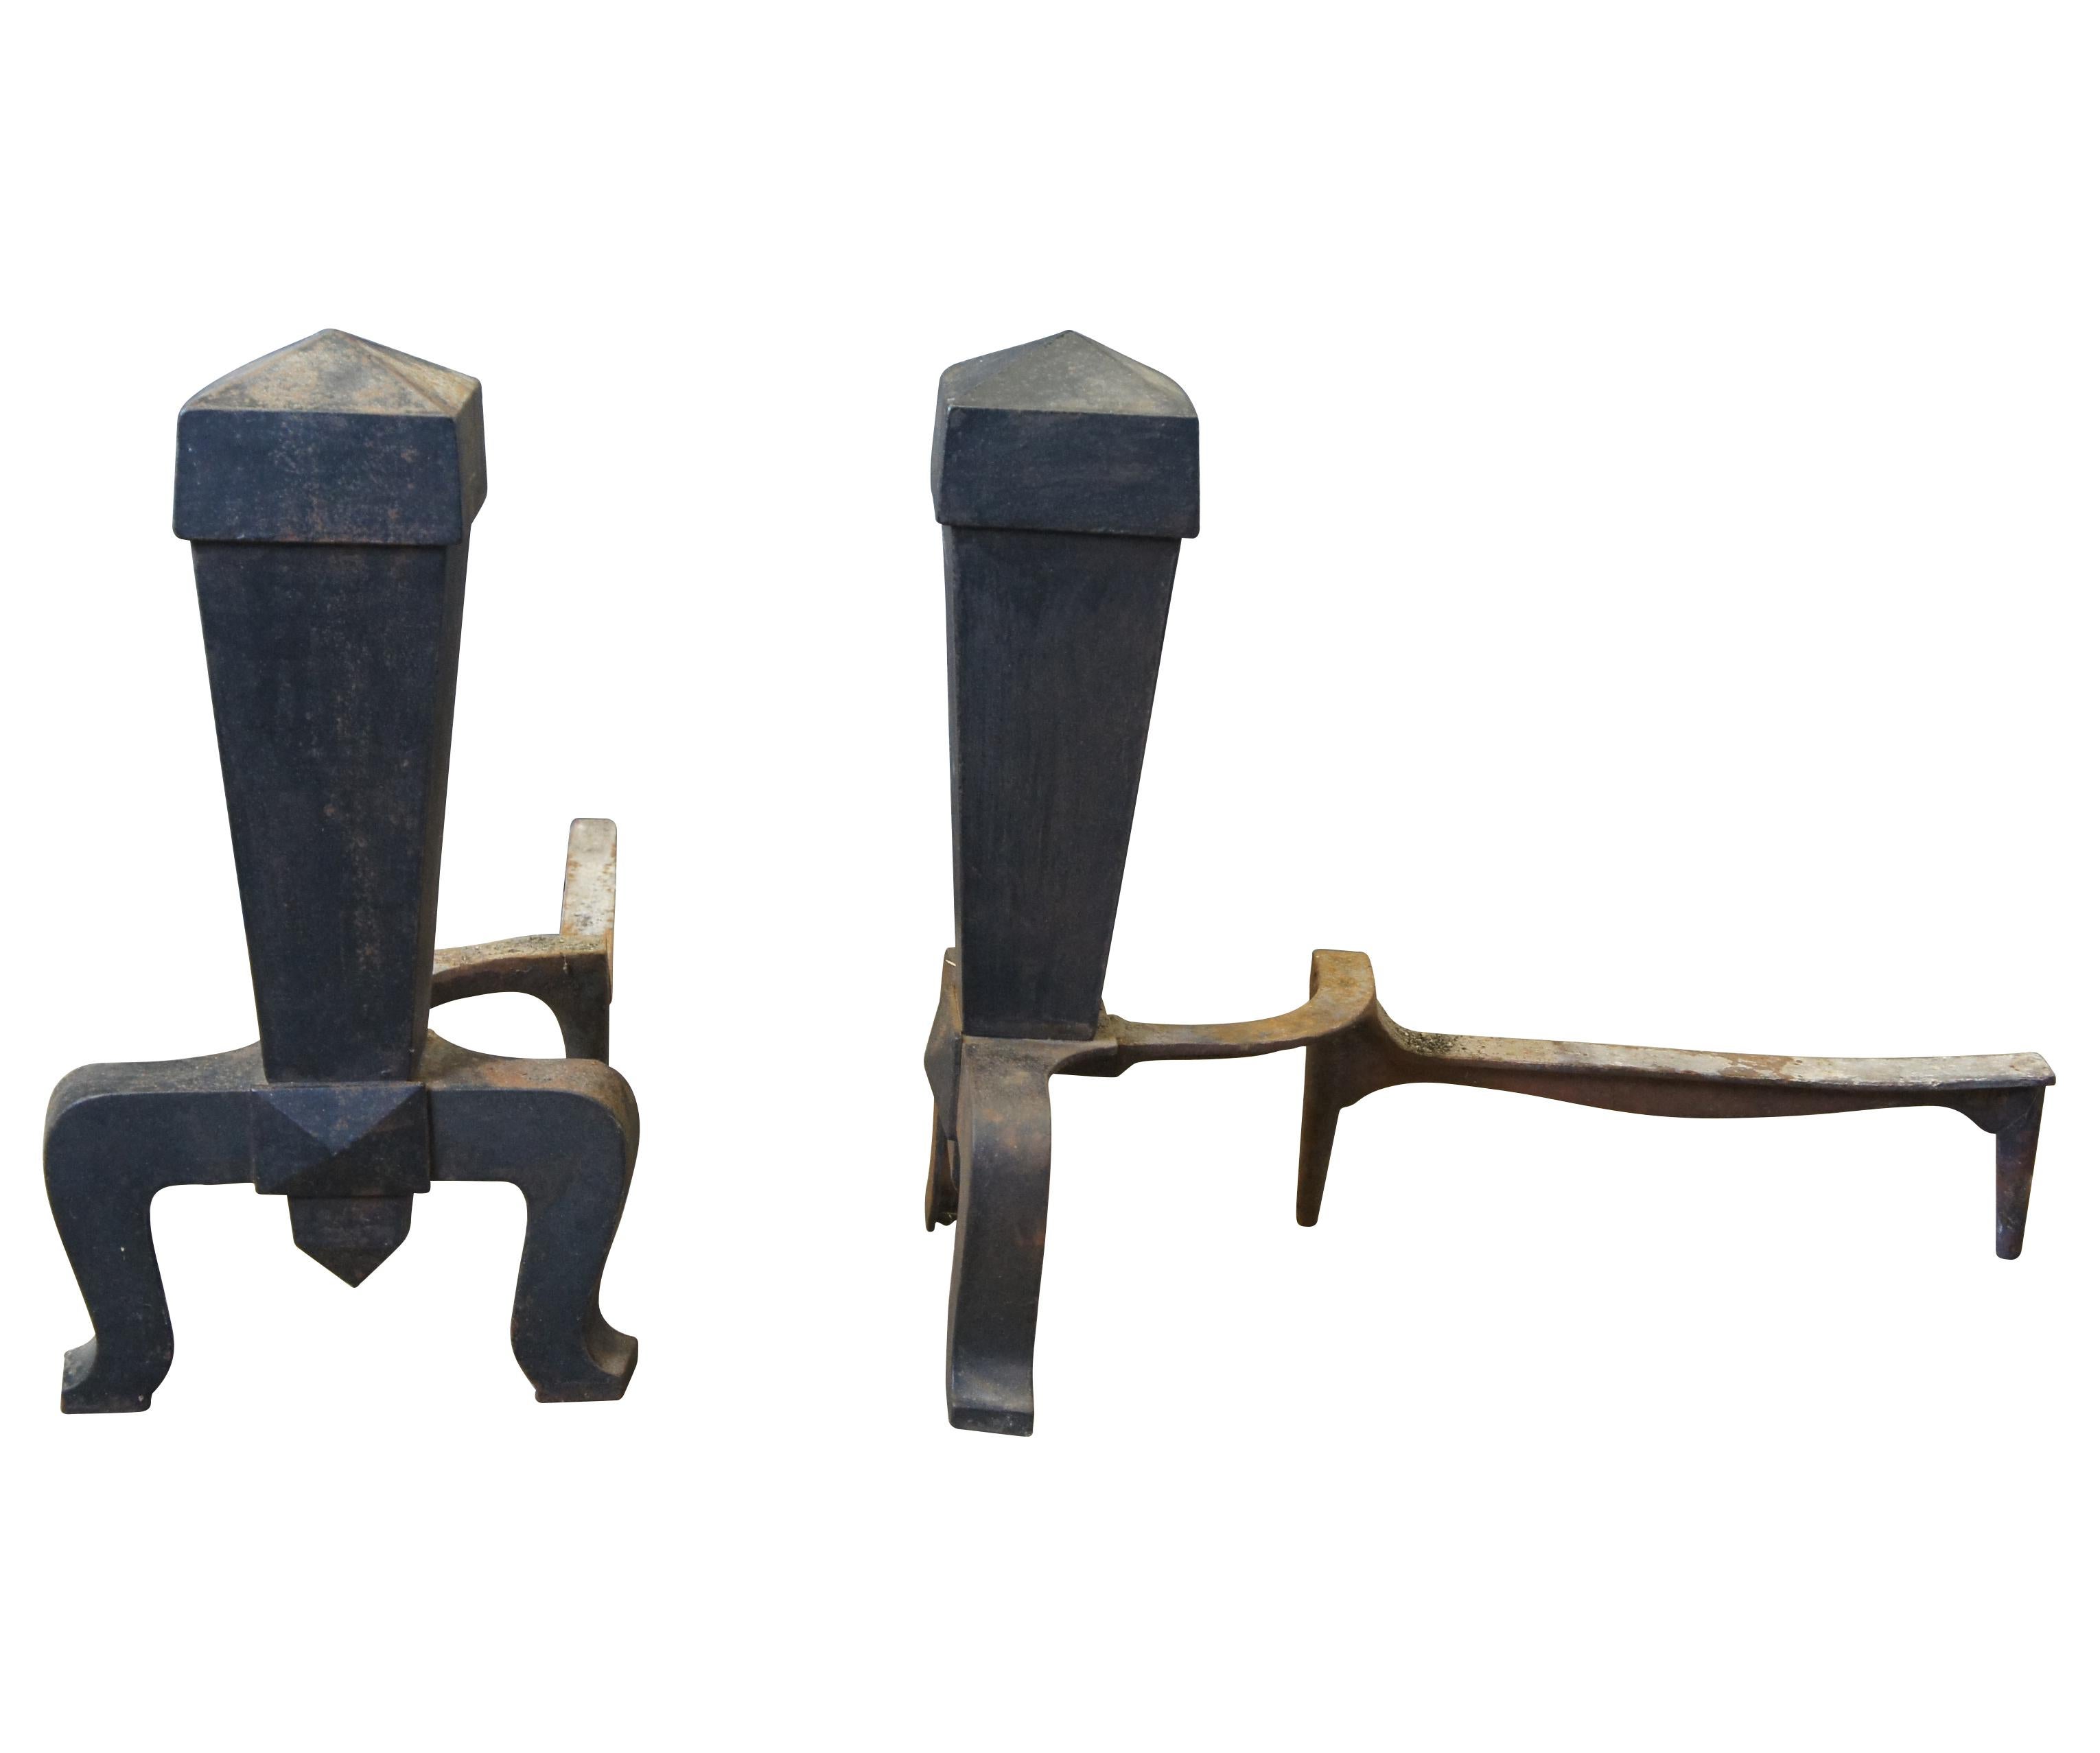 Pair of early 20th century mission or craftsman fireplace andirons. Features a square tapered form leading to a flared leg base. Size: 19